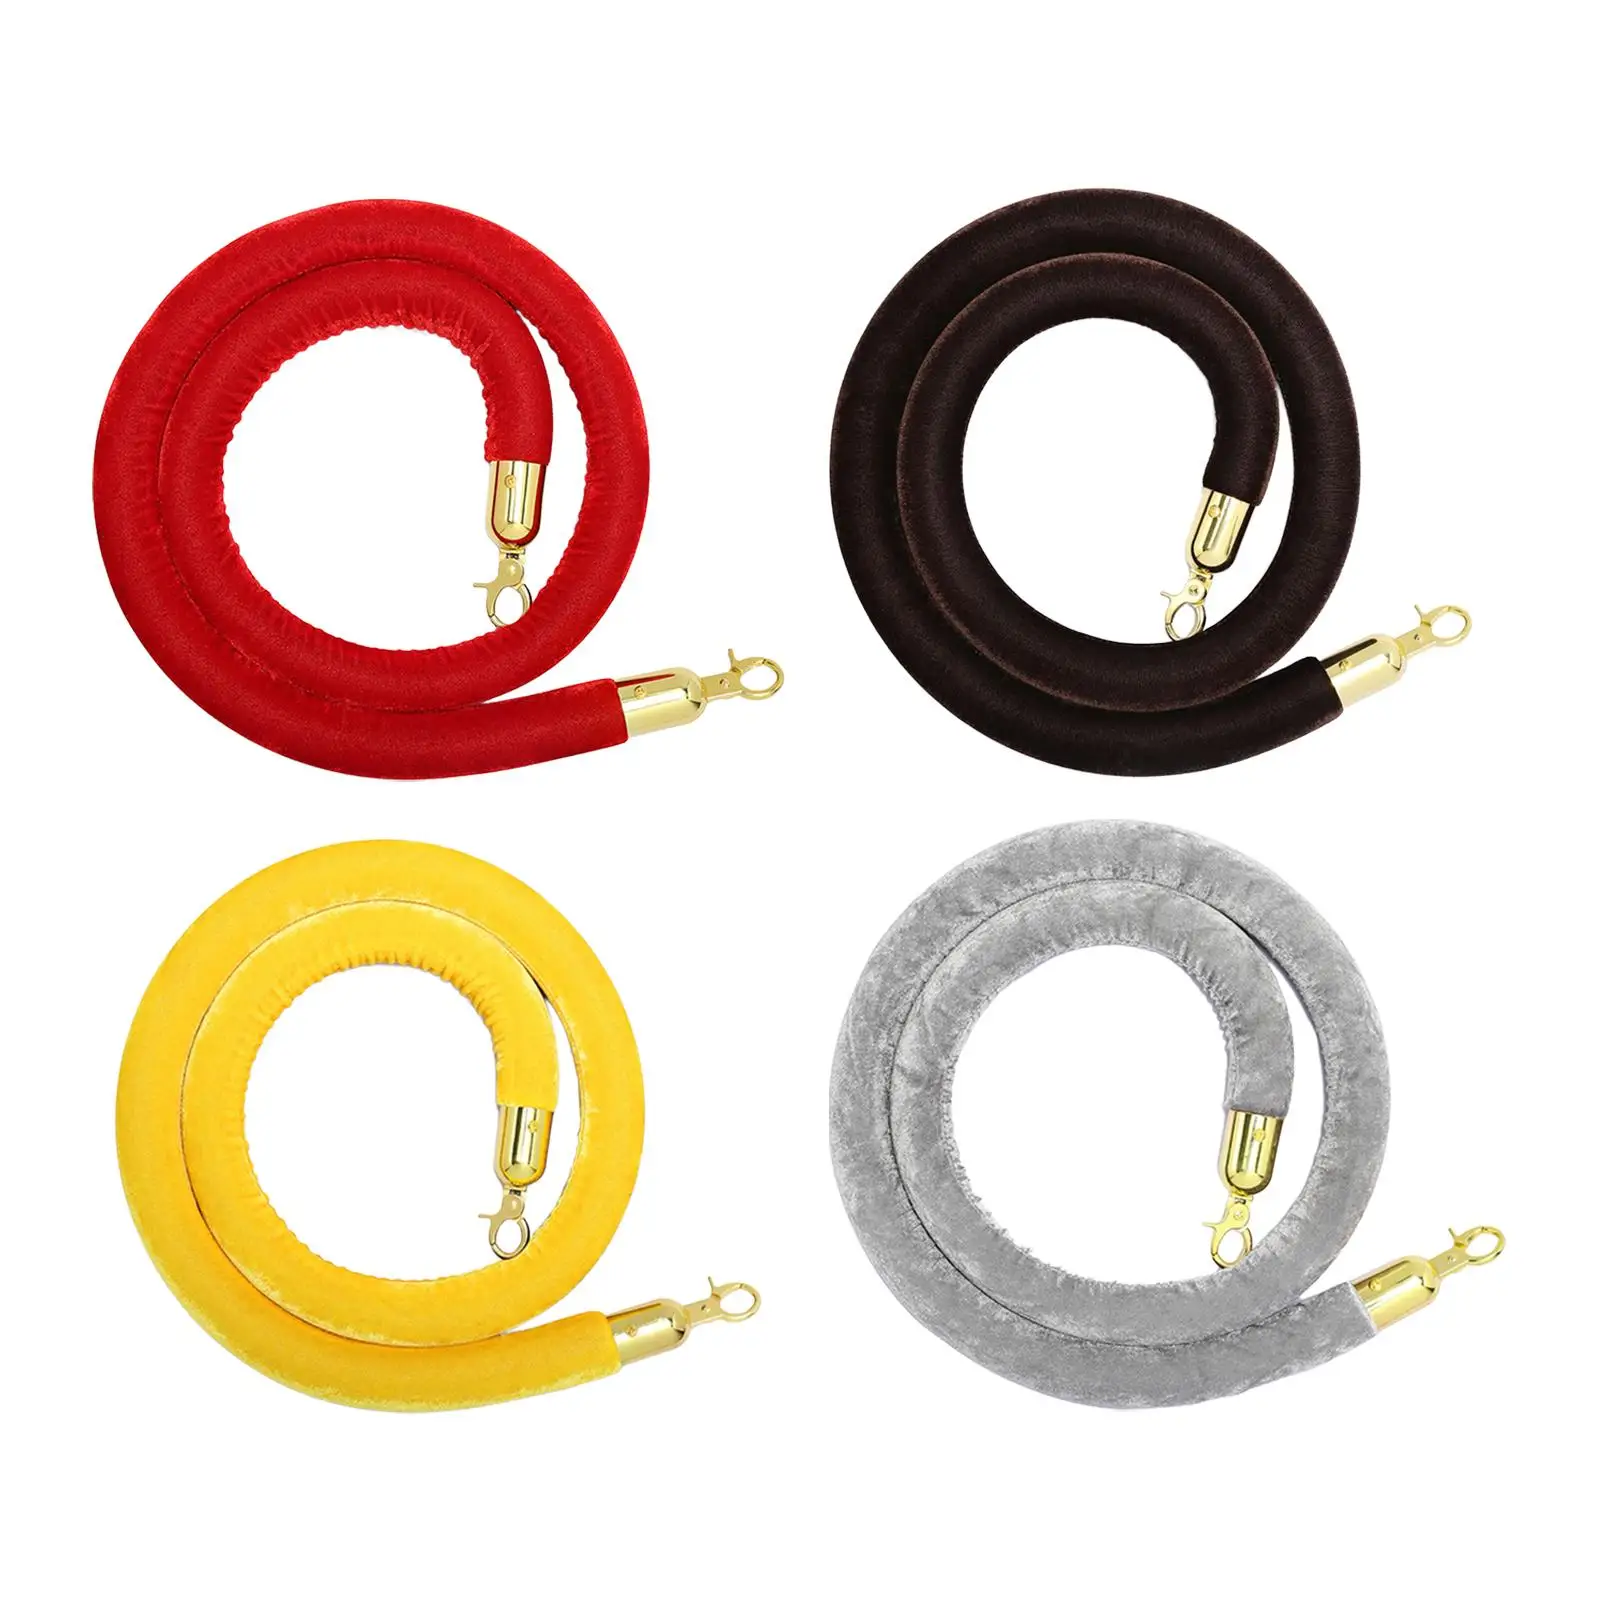 Stanchion Rope 1.5 Meter Velvet VIP Crowd Control Queue Line Barrier Rope for Queue Divider Hotel